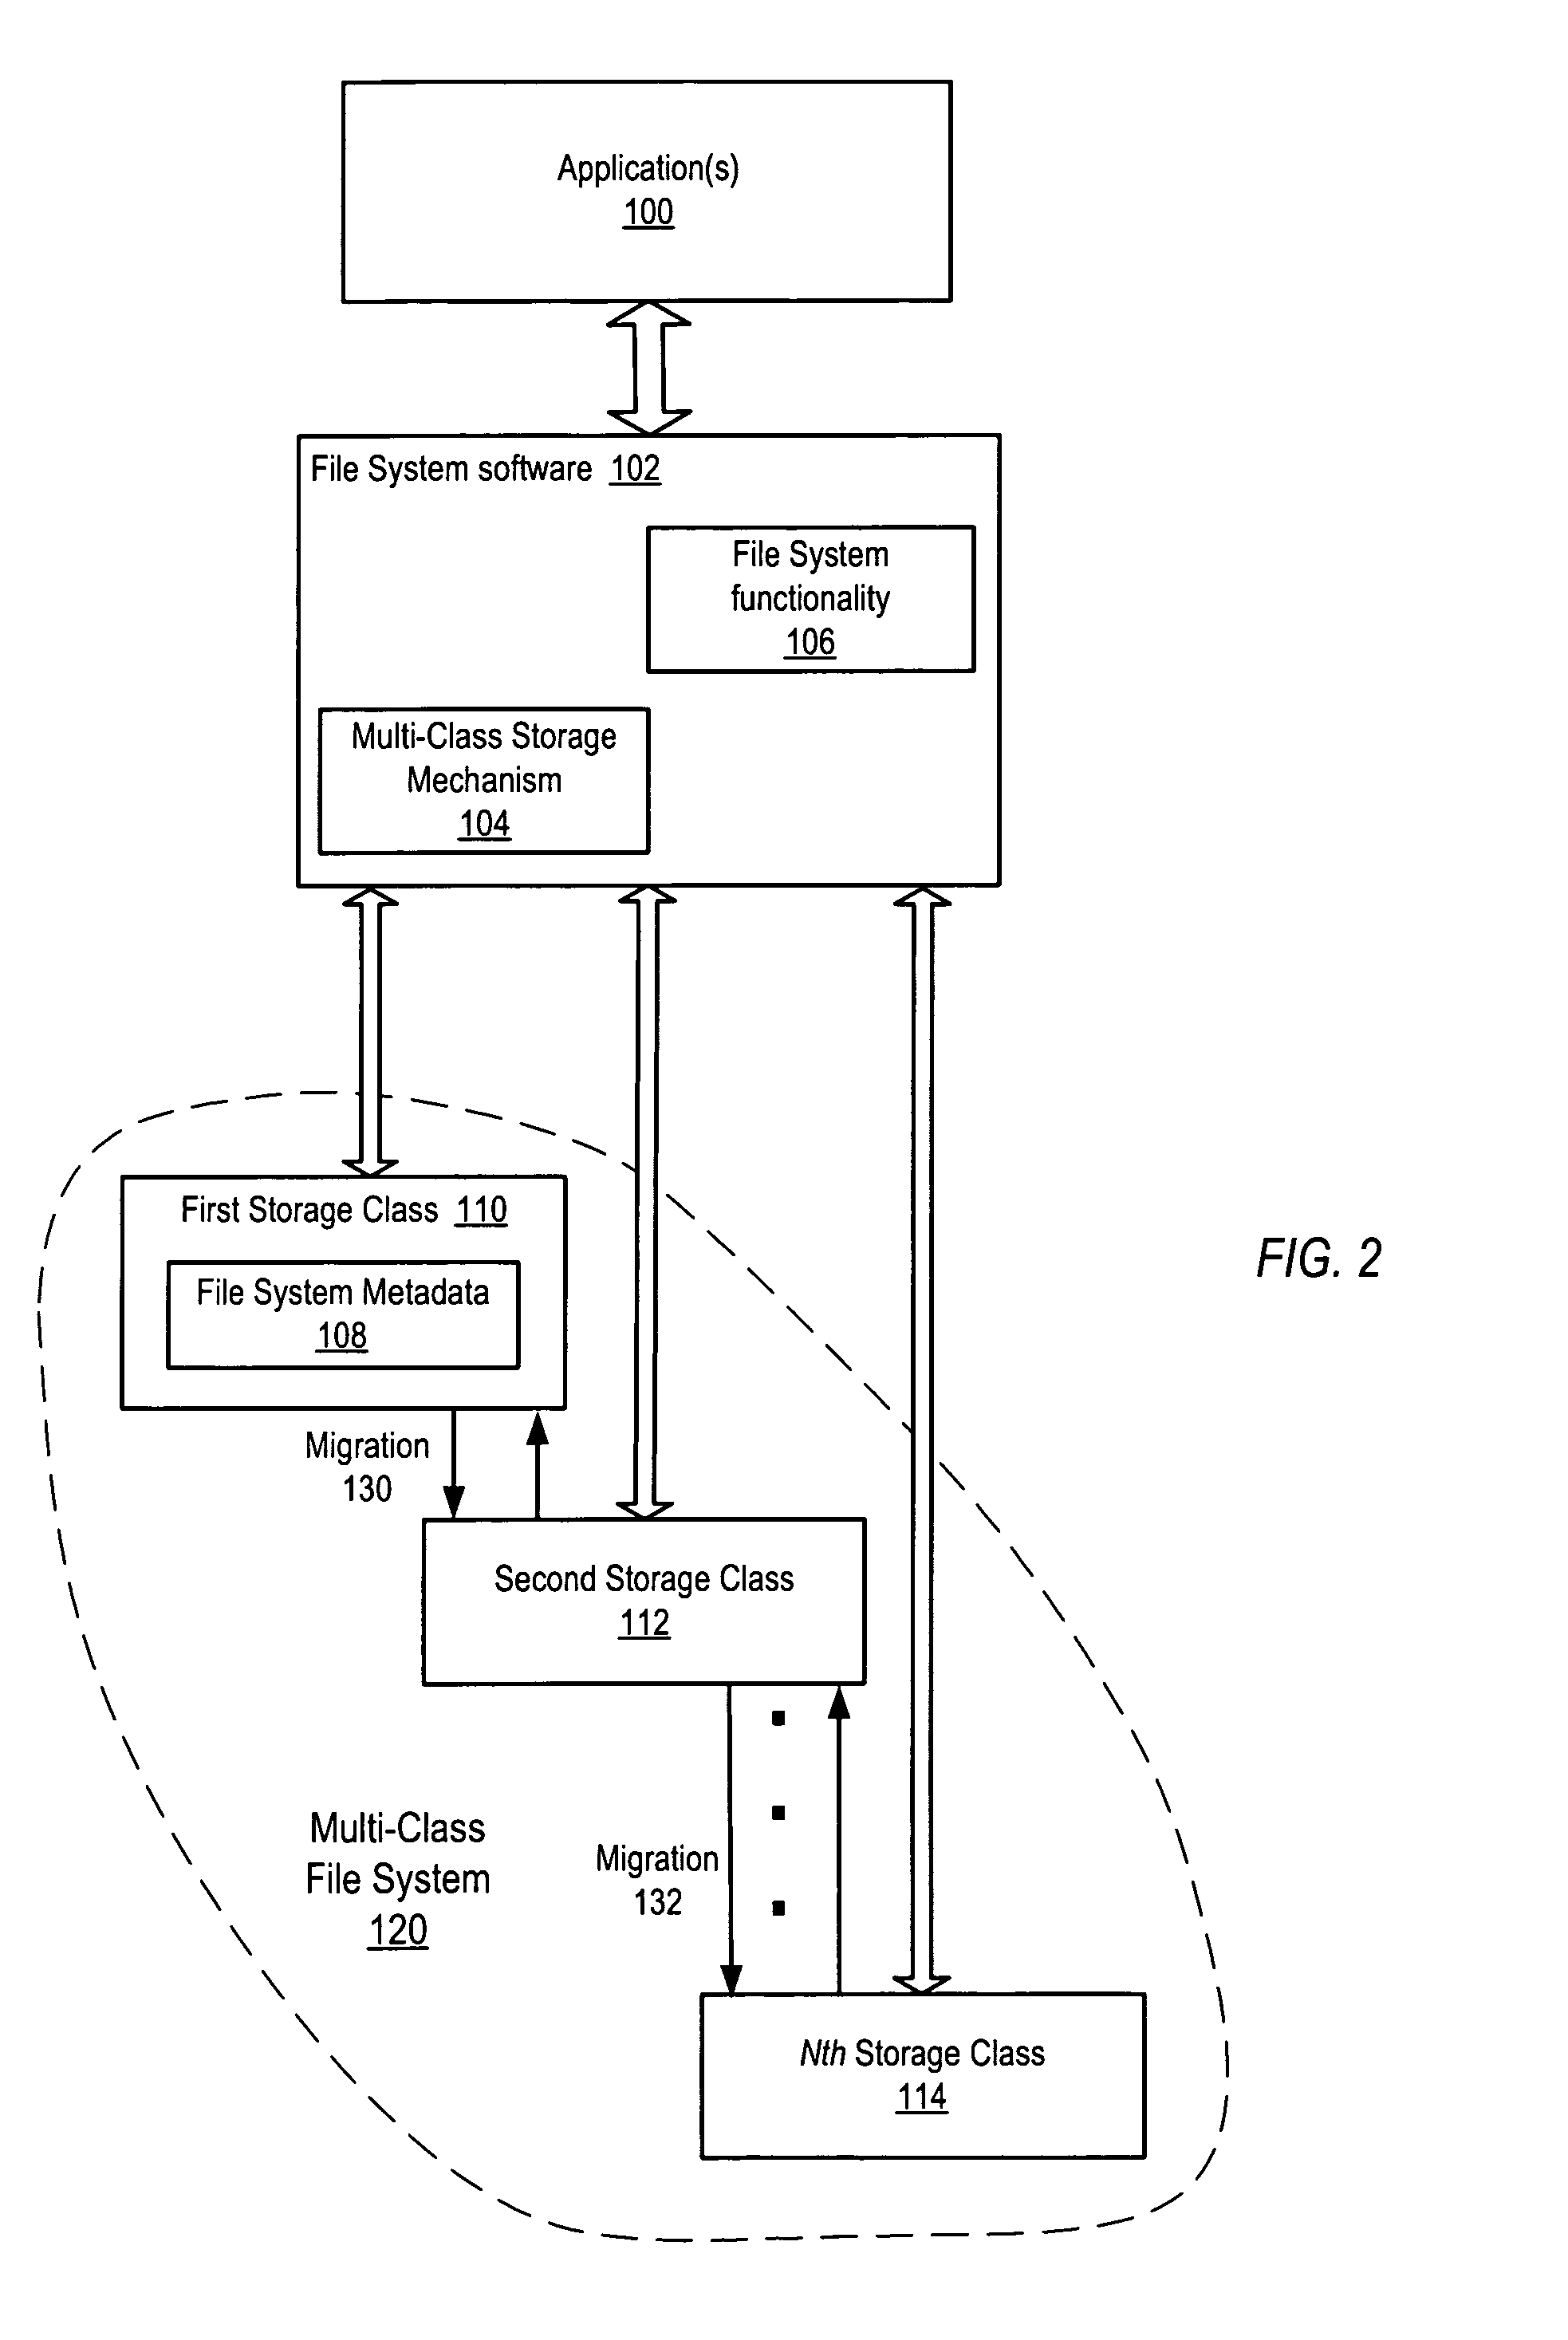 Restore mechanism for a multi-class file system